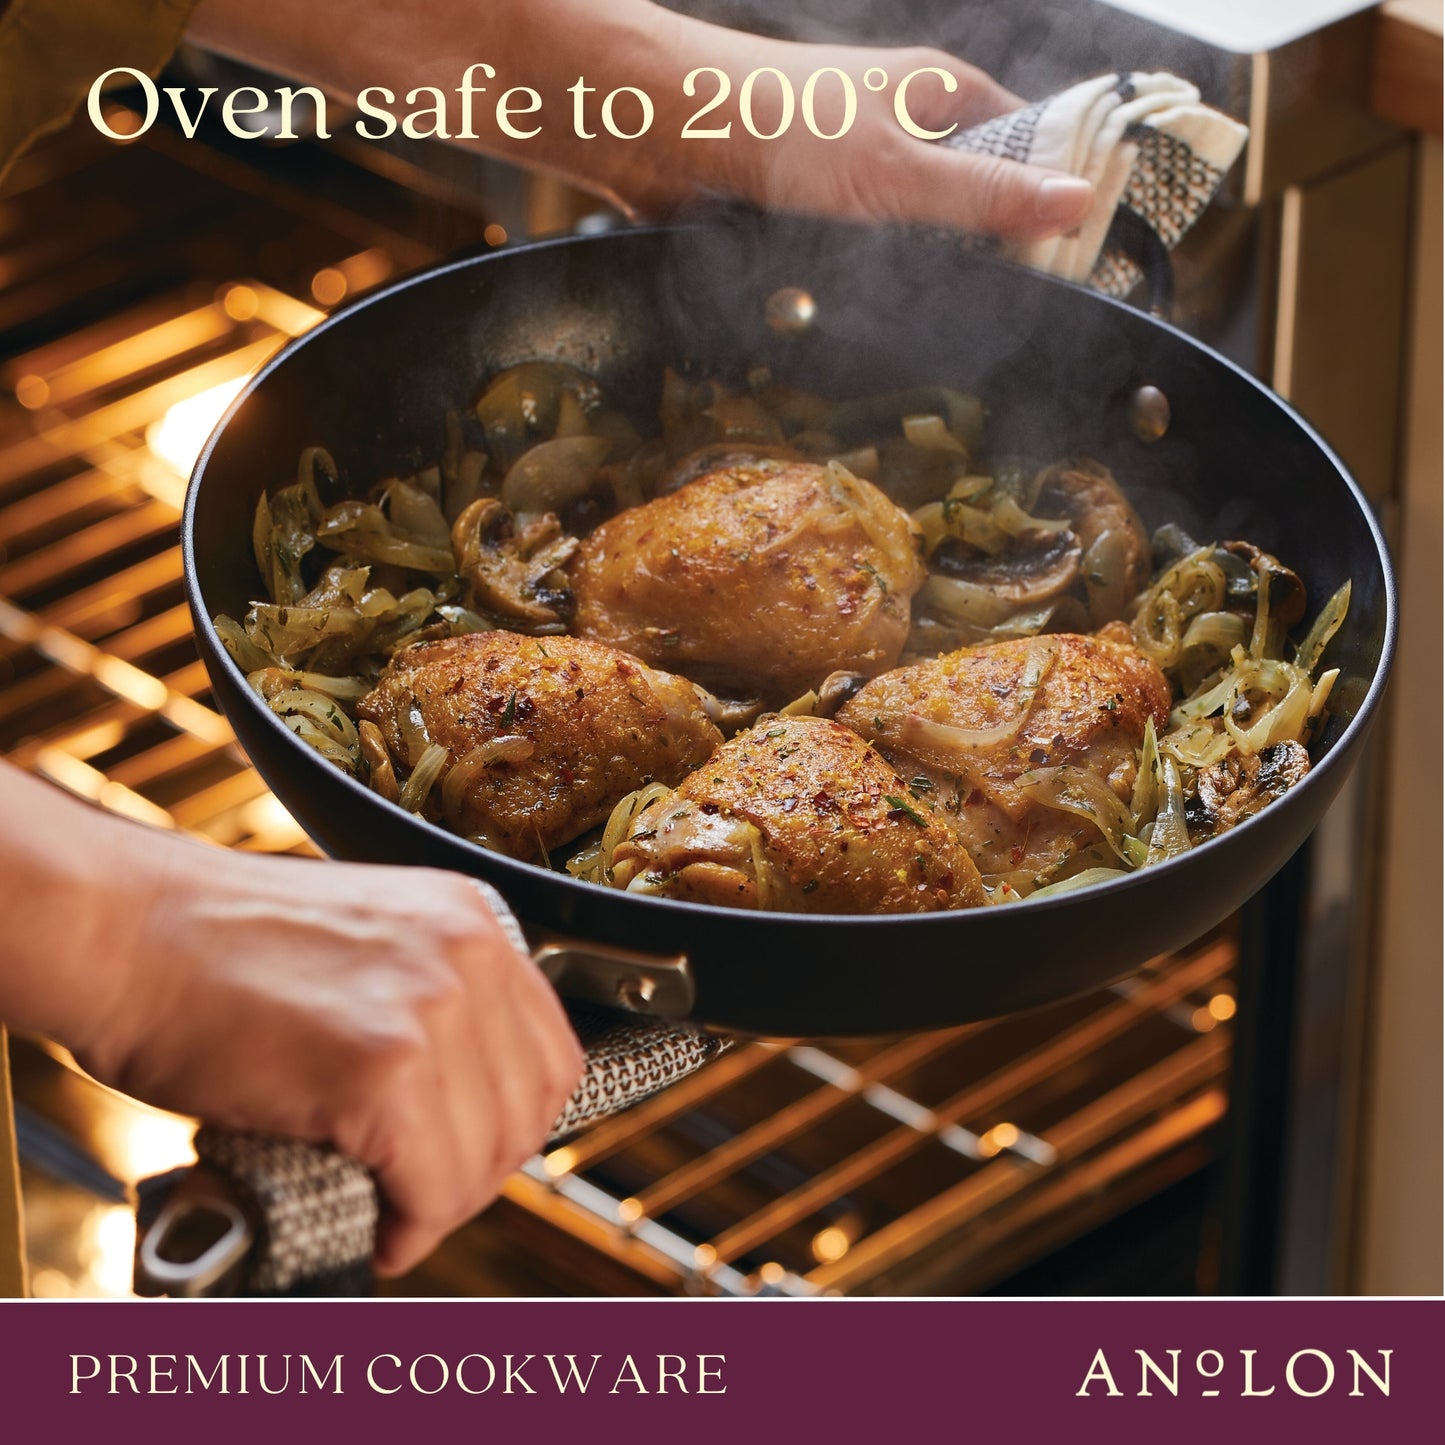 Anolon Advanced Home Nonstick Covered Saute With Helper Handle 30cm Onyx